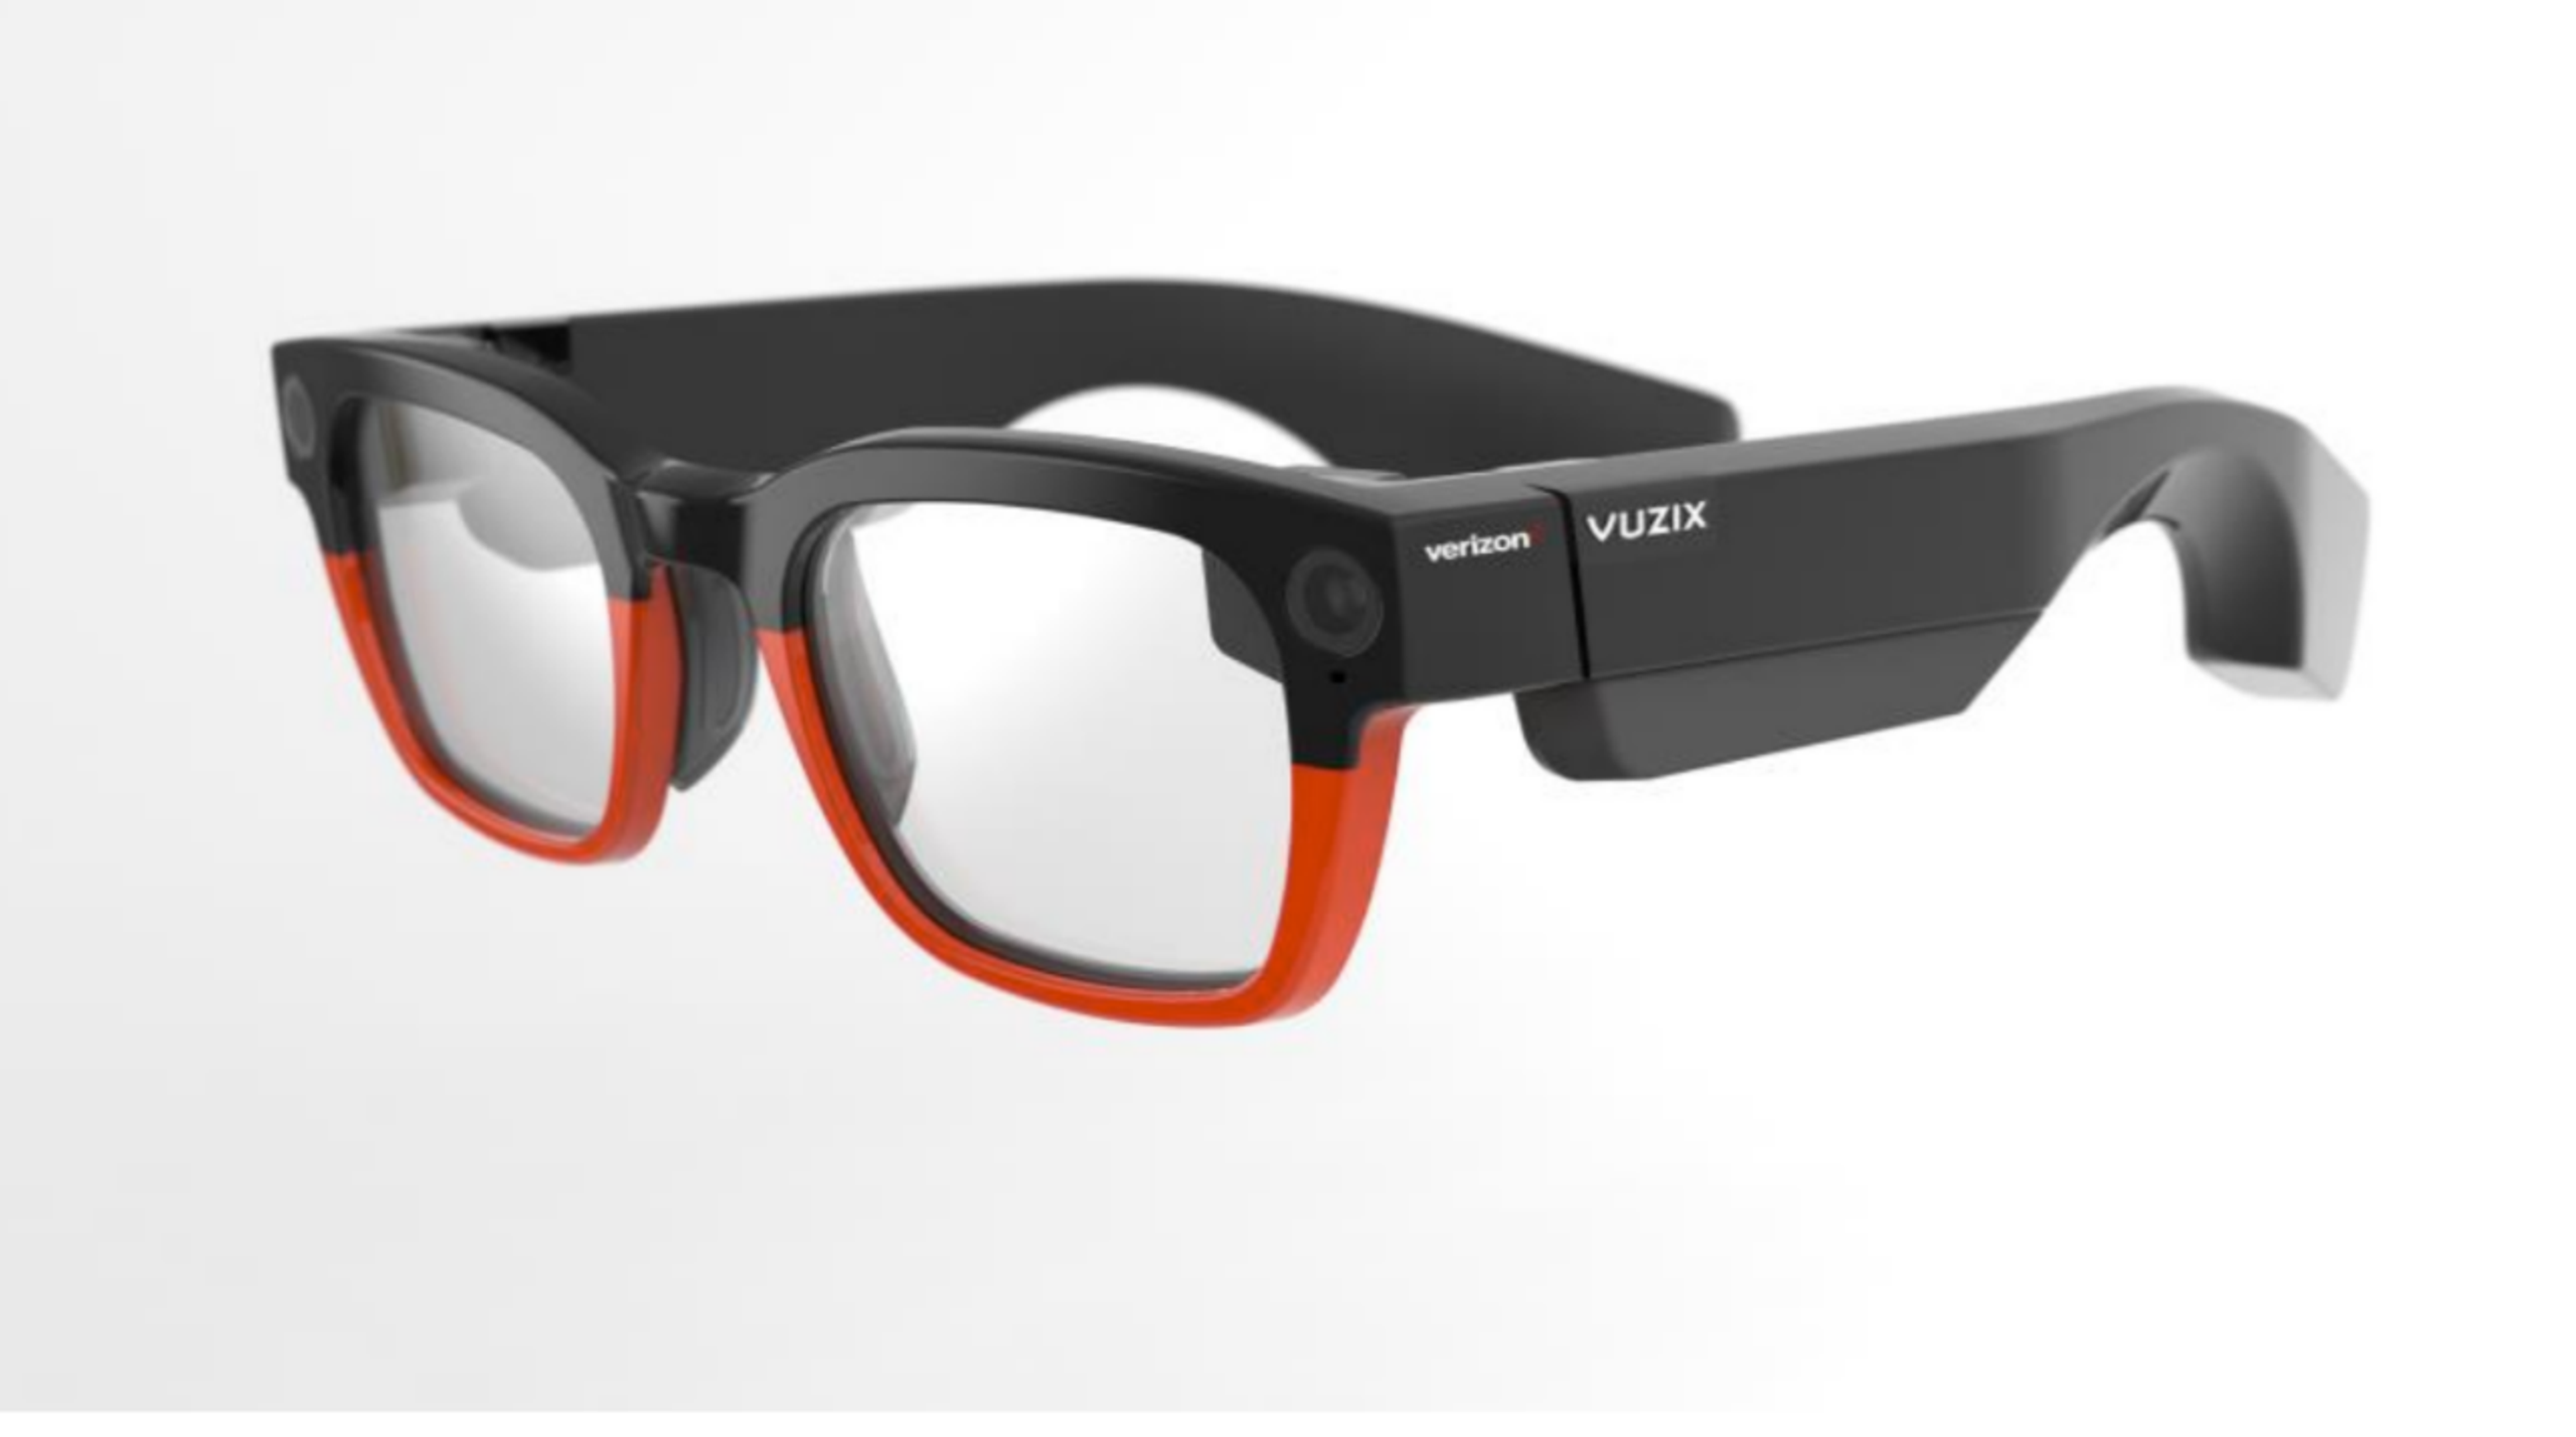 glasses.png?optimize=medium&dpr=1 Vuzix Corp. (NASDAQ: VUZI) is arguably no exception, leaving 2021 with a bang and entering the new year fresh-faced and making moves. The company is a leading supplier of smart glasses and AR technologies, developing innovative products primarily focused on enterprise markets. This includes personal displays and wearable computing devices triggered by touchpad, voice, and Bluetooth inputs. In addition, it offers users a portable, high-quality viewing experience, shared view video streaming, and dynamic solutions for mobility purposes. That means you can join a zoom call, or remotely share what you’re seeing with an expert for training, field service, telemedicine and any variety of uses.